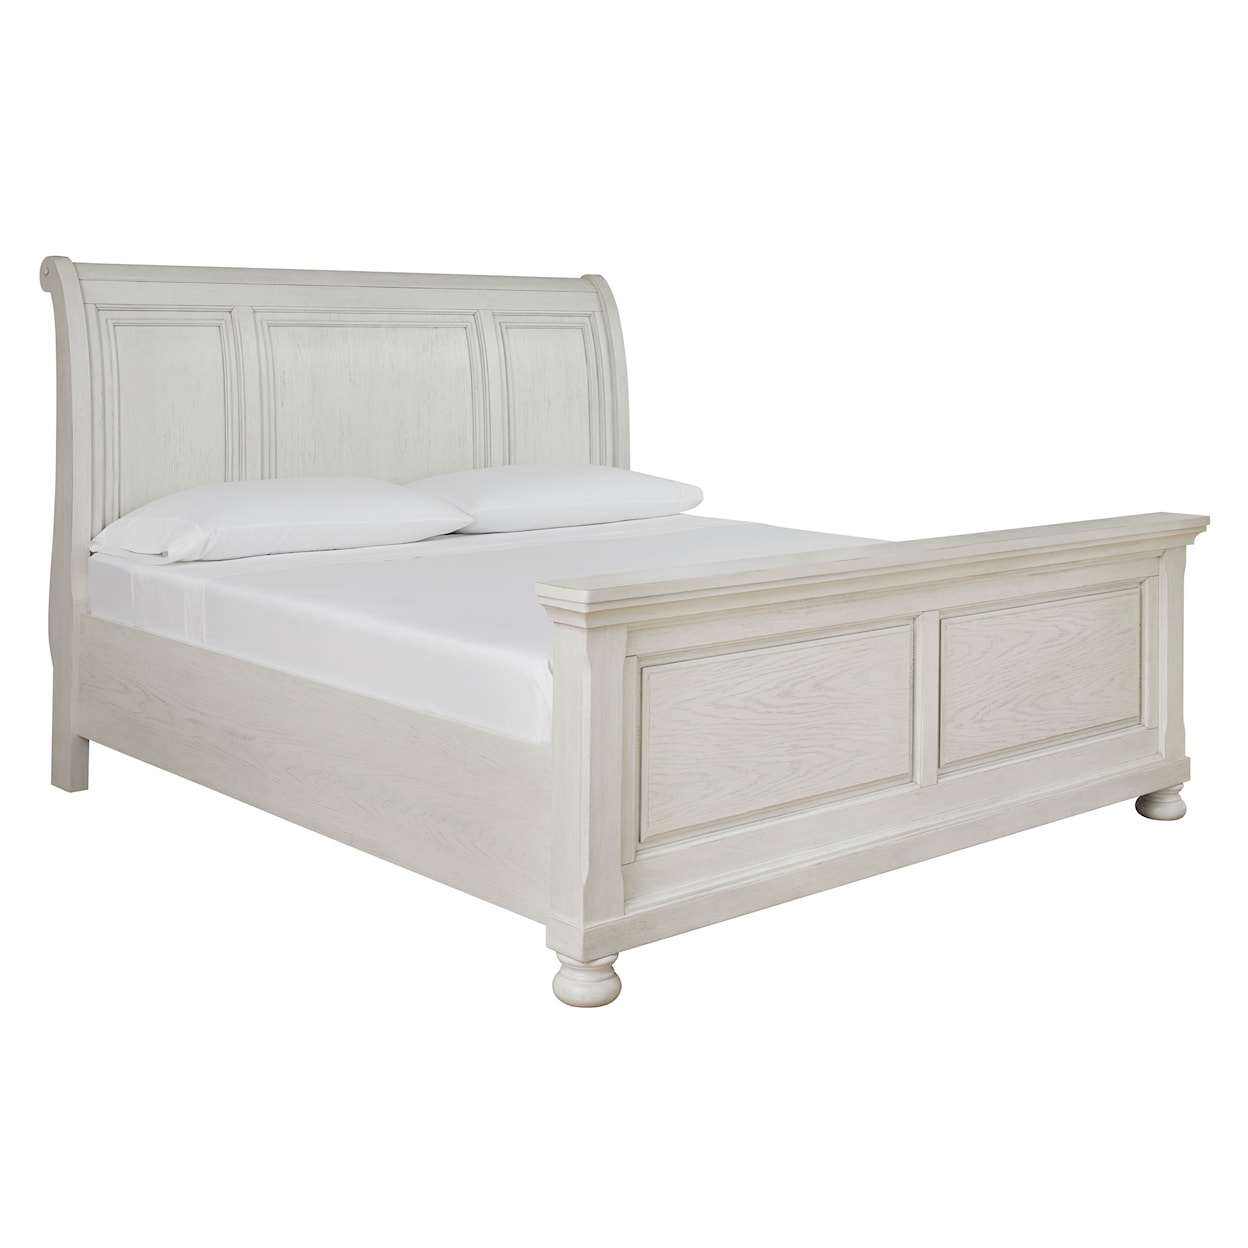 Signature Robbinsdale Queen Sleigh Bed